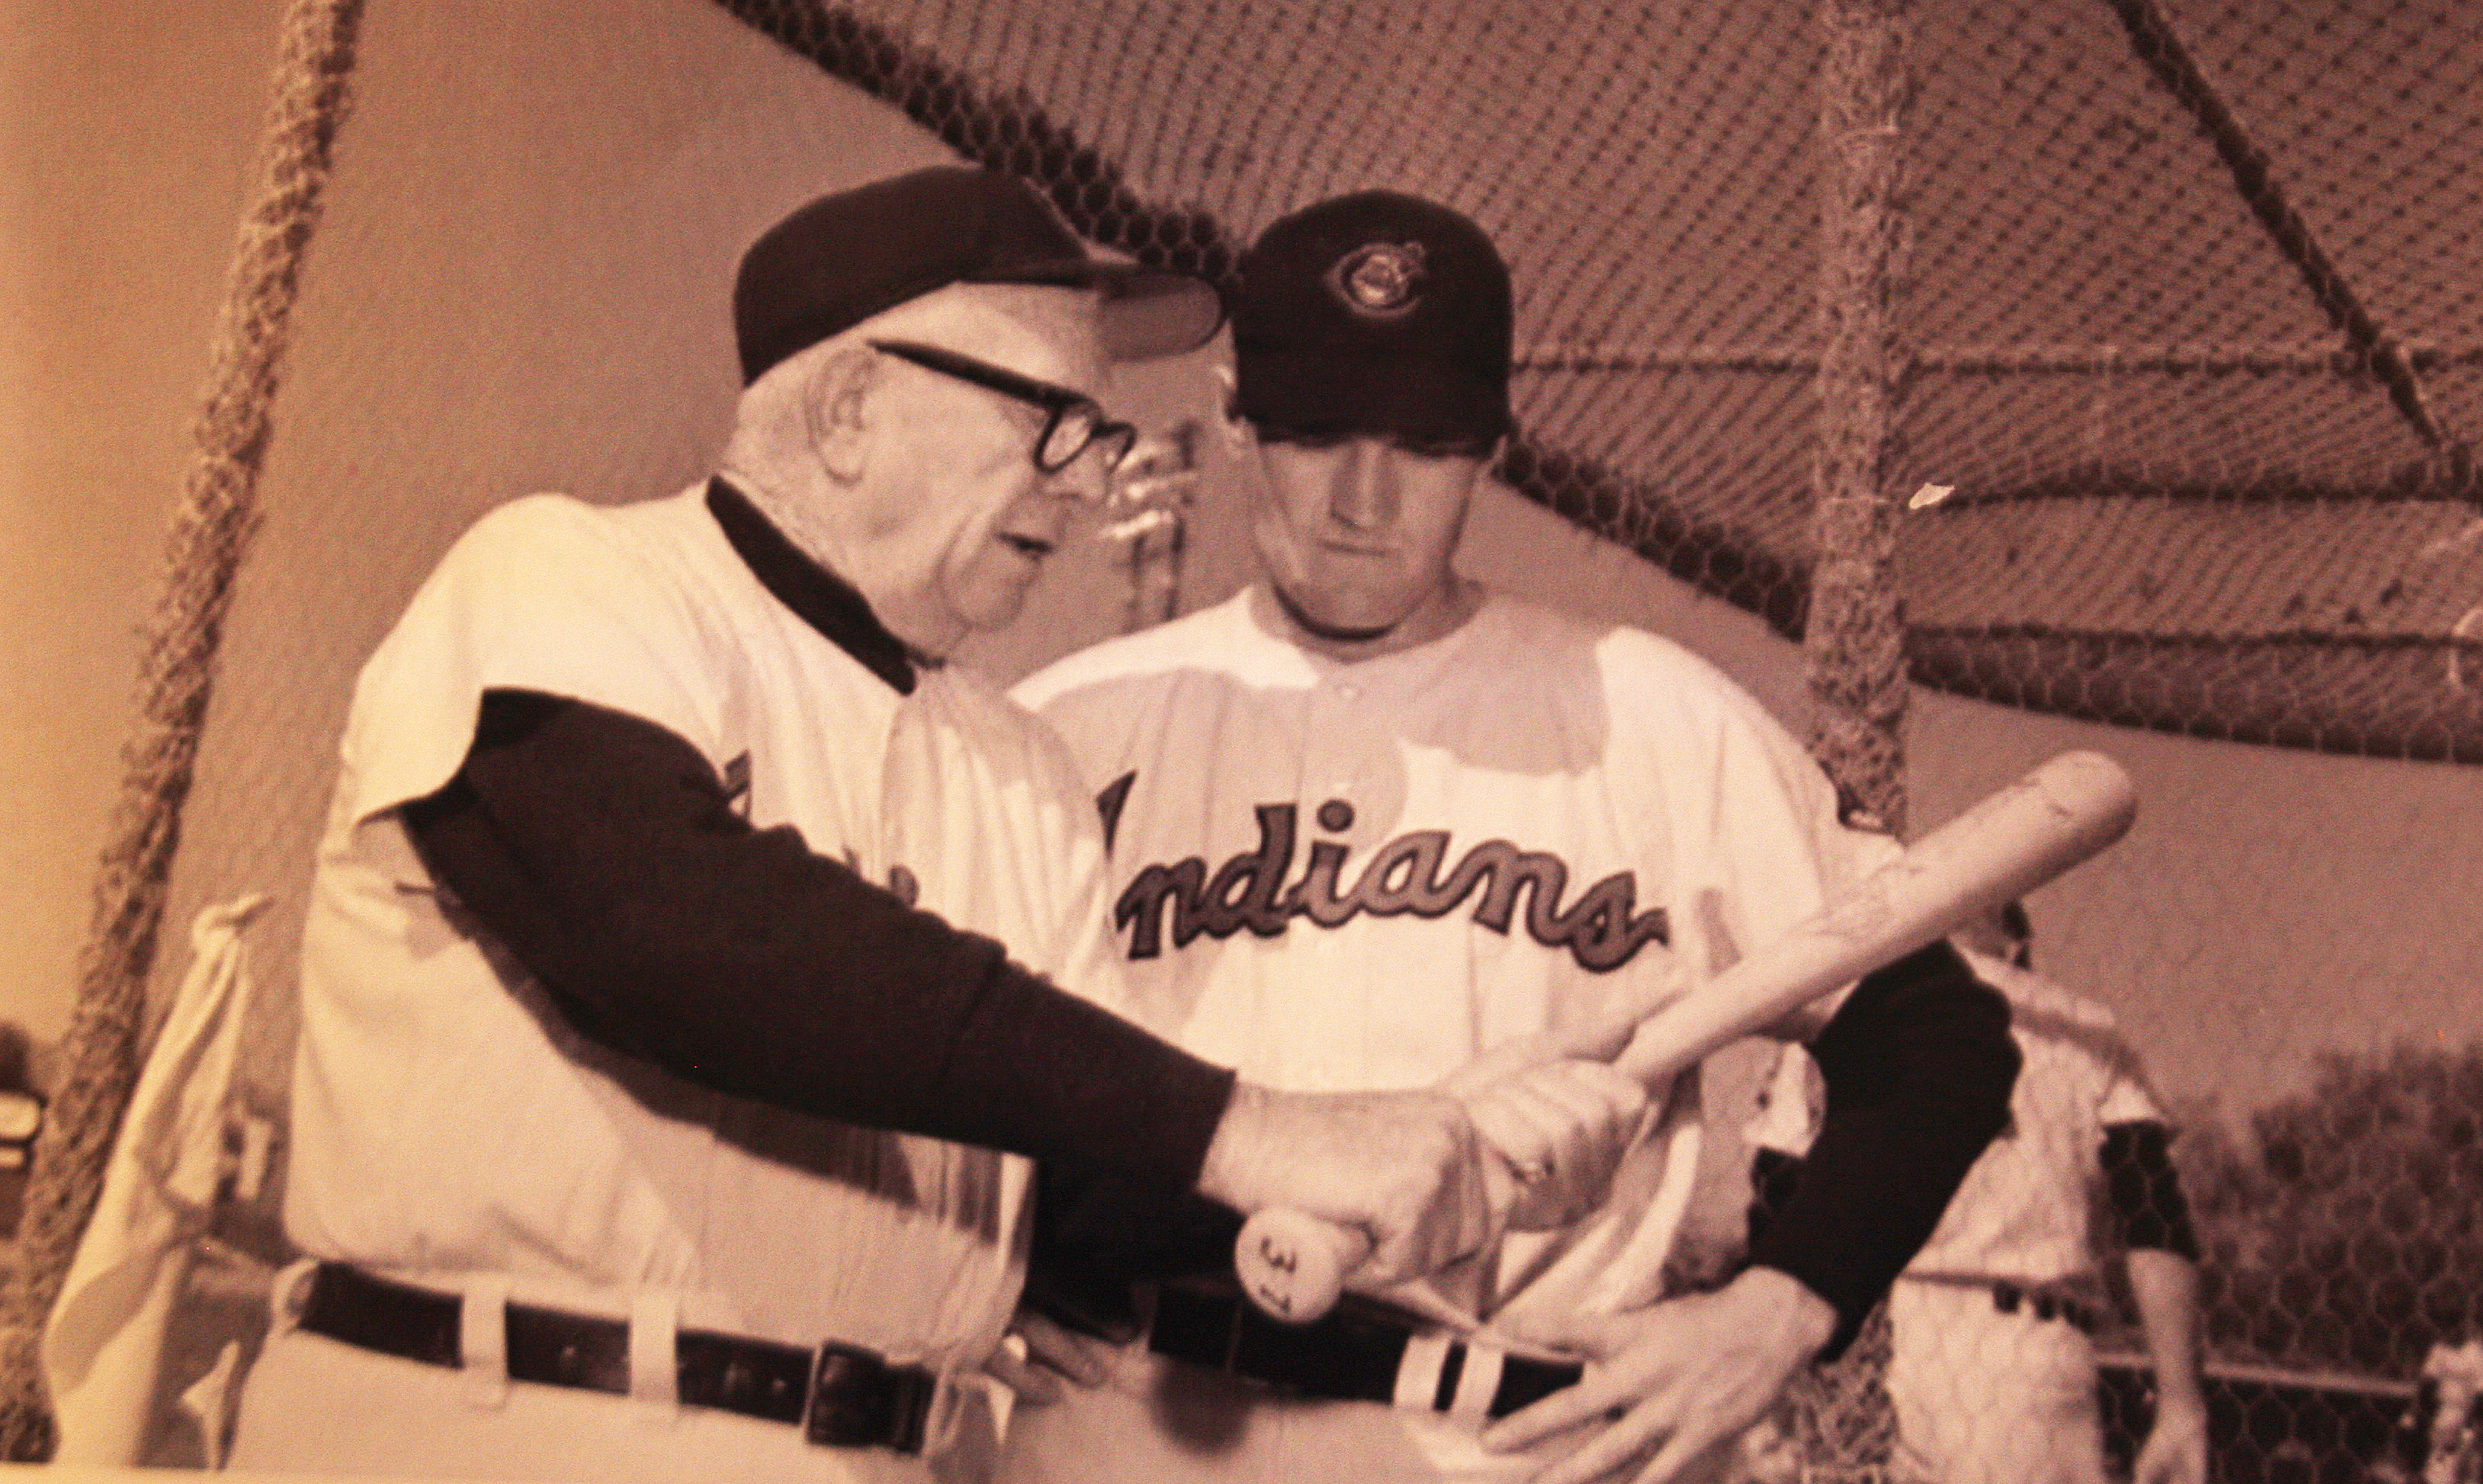 Carroll Hardy dies: Multisport star played baseball in Indianapolis